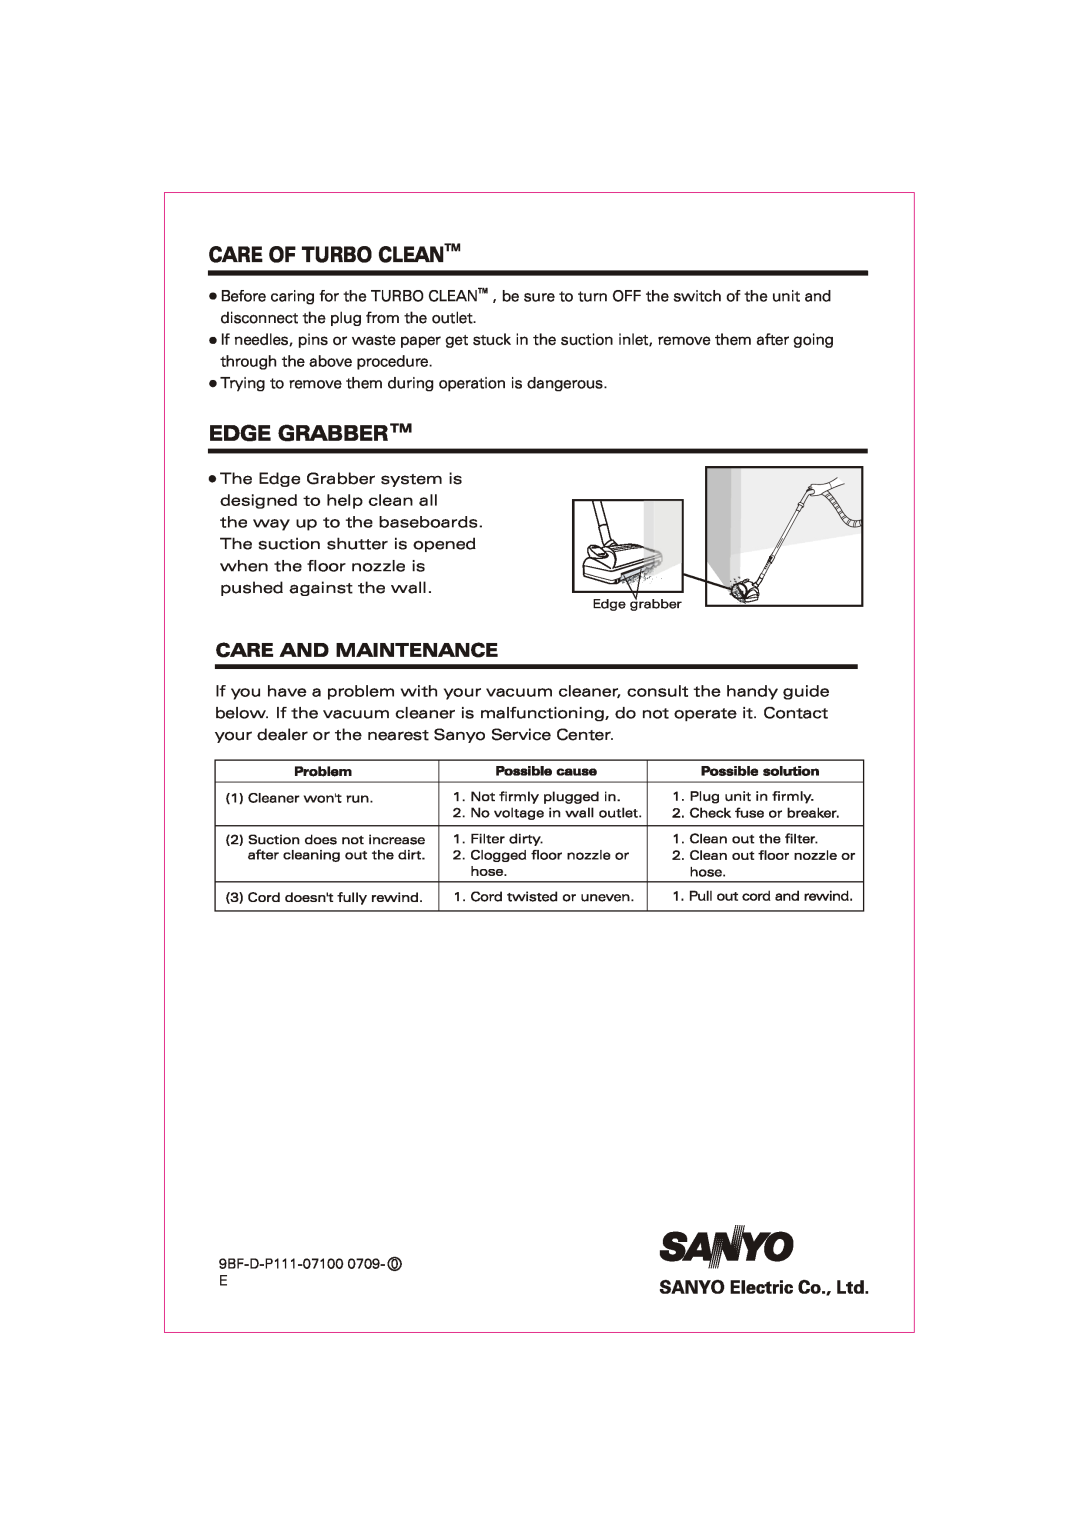 Sanyo SC-5006 instruction manual Care Of Turbo Cleantm, Edge Grabbertm, Care And Maintenance 